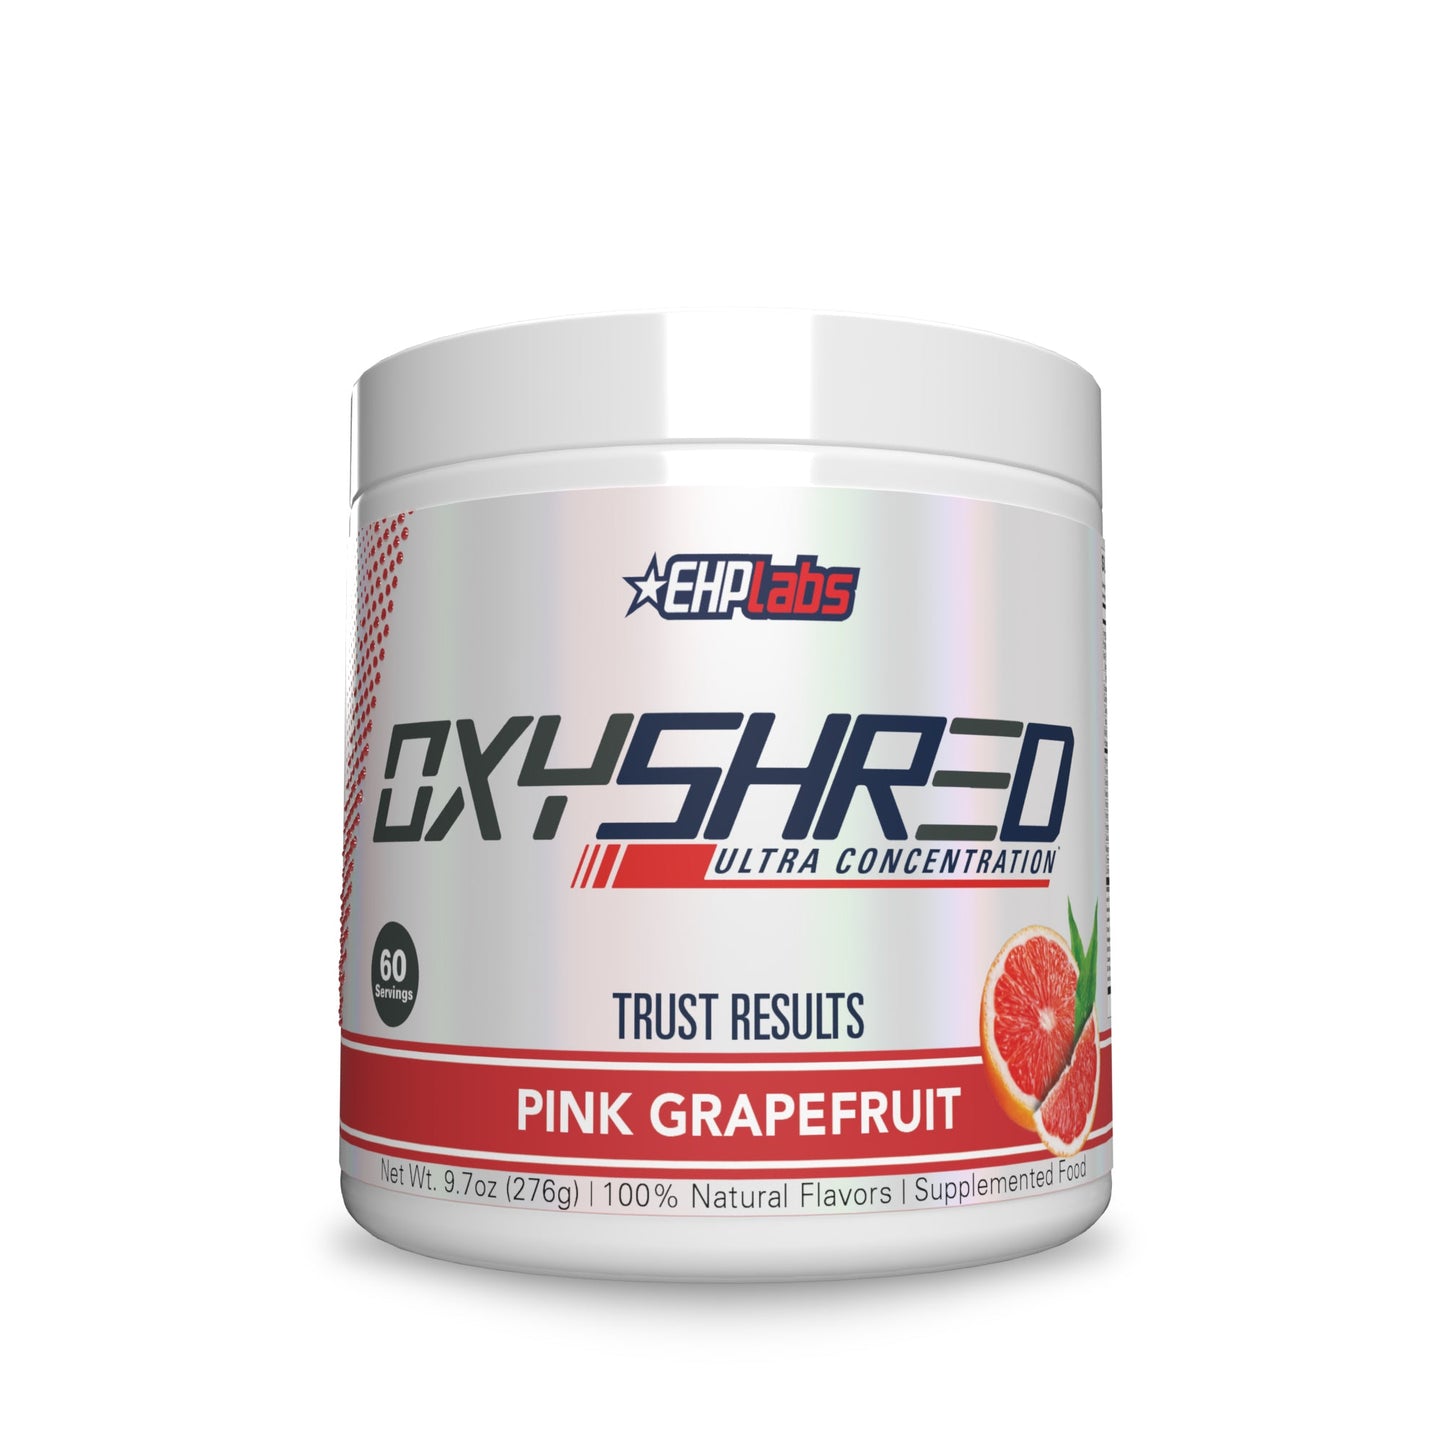 EHP Labs OxyShred Ultra Concentration 60 Serves - Supplements - Pink Grapefruit - The Cave Gym